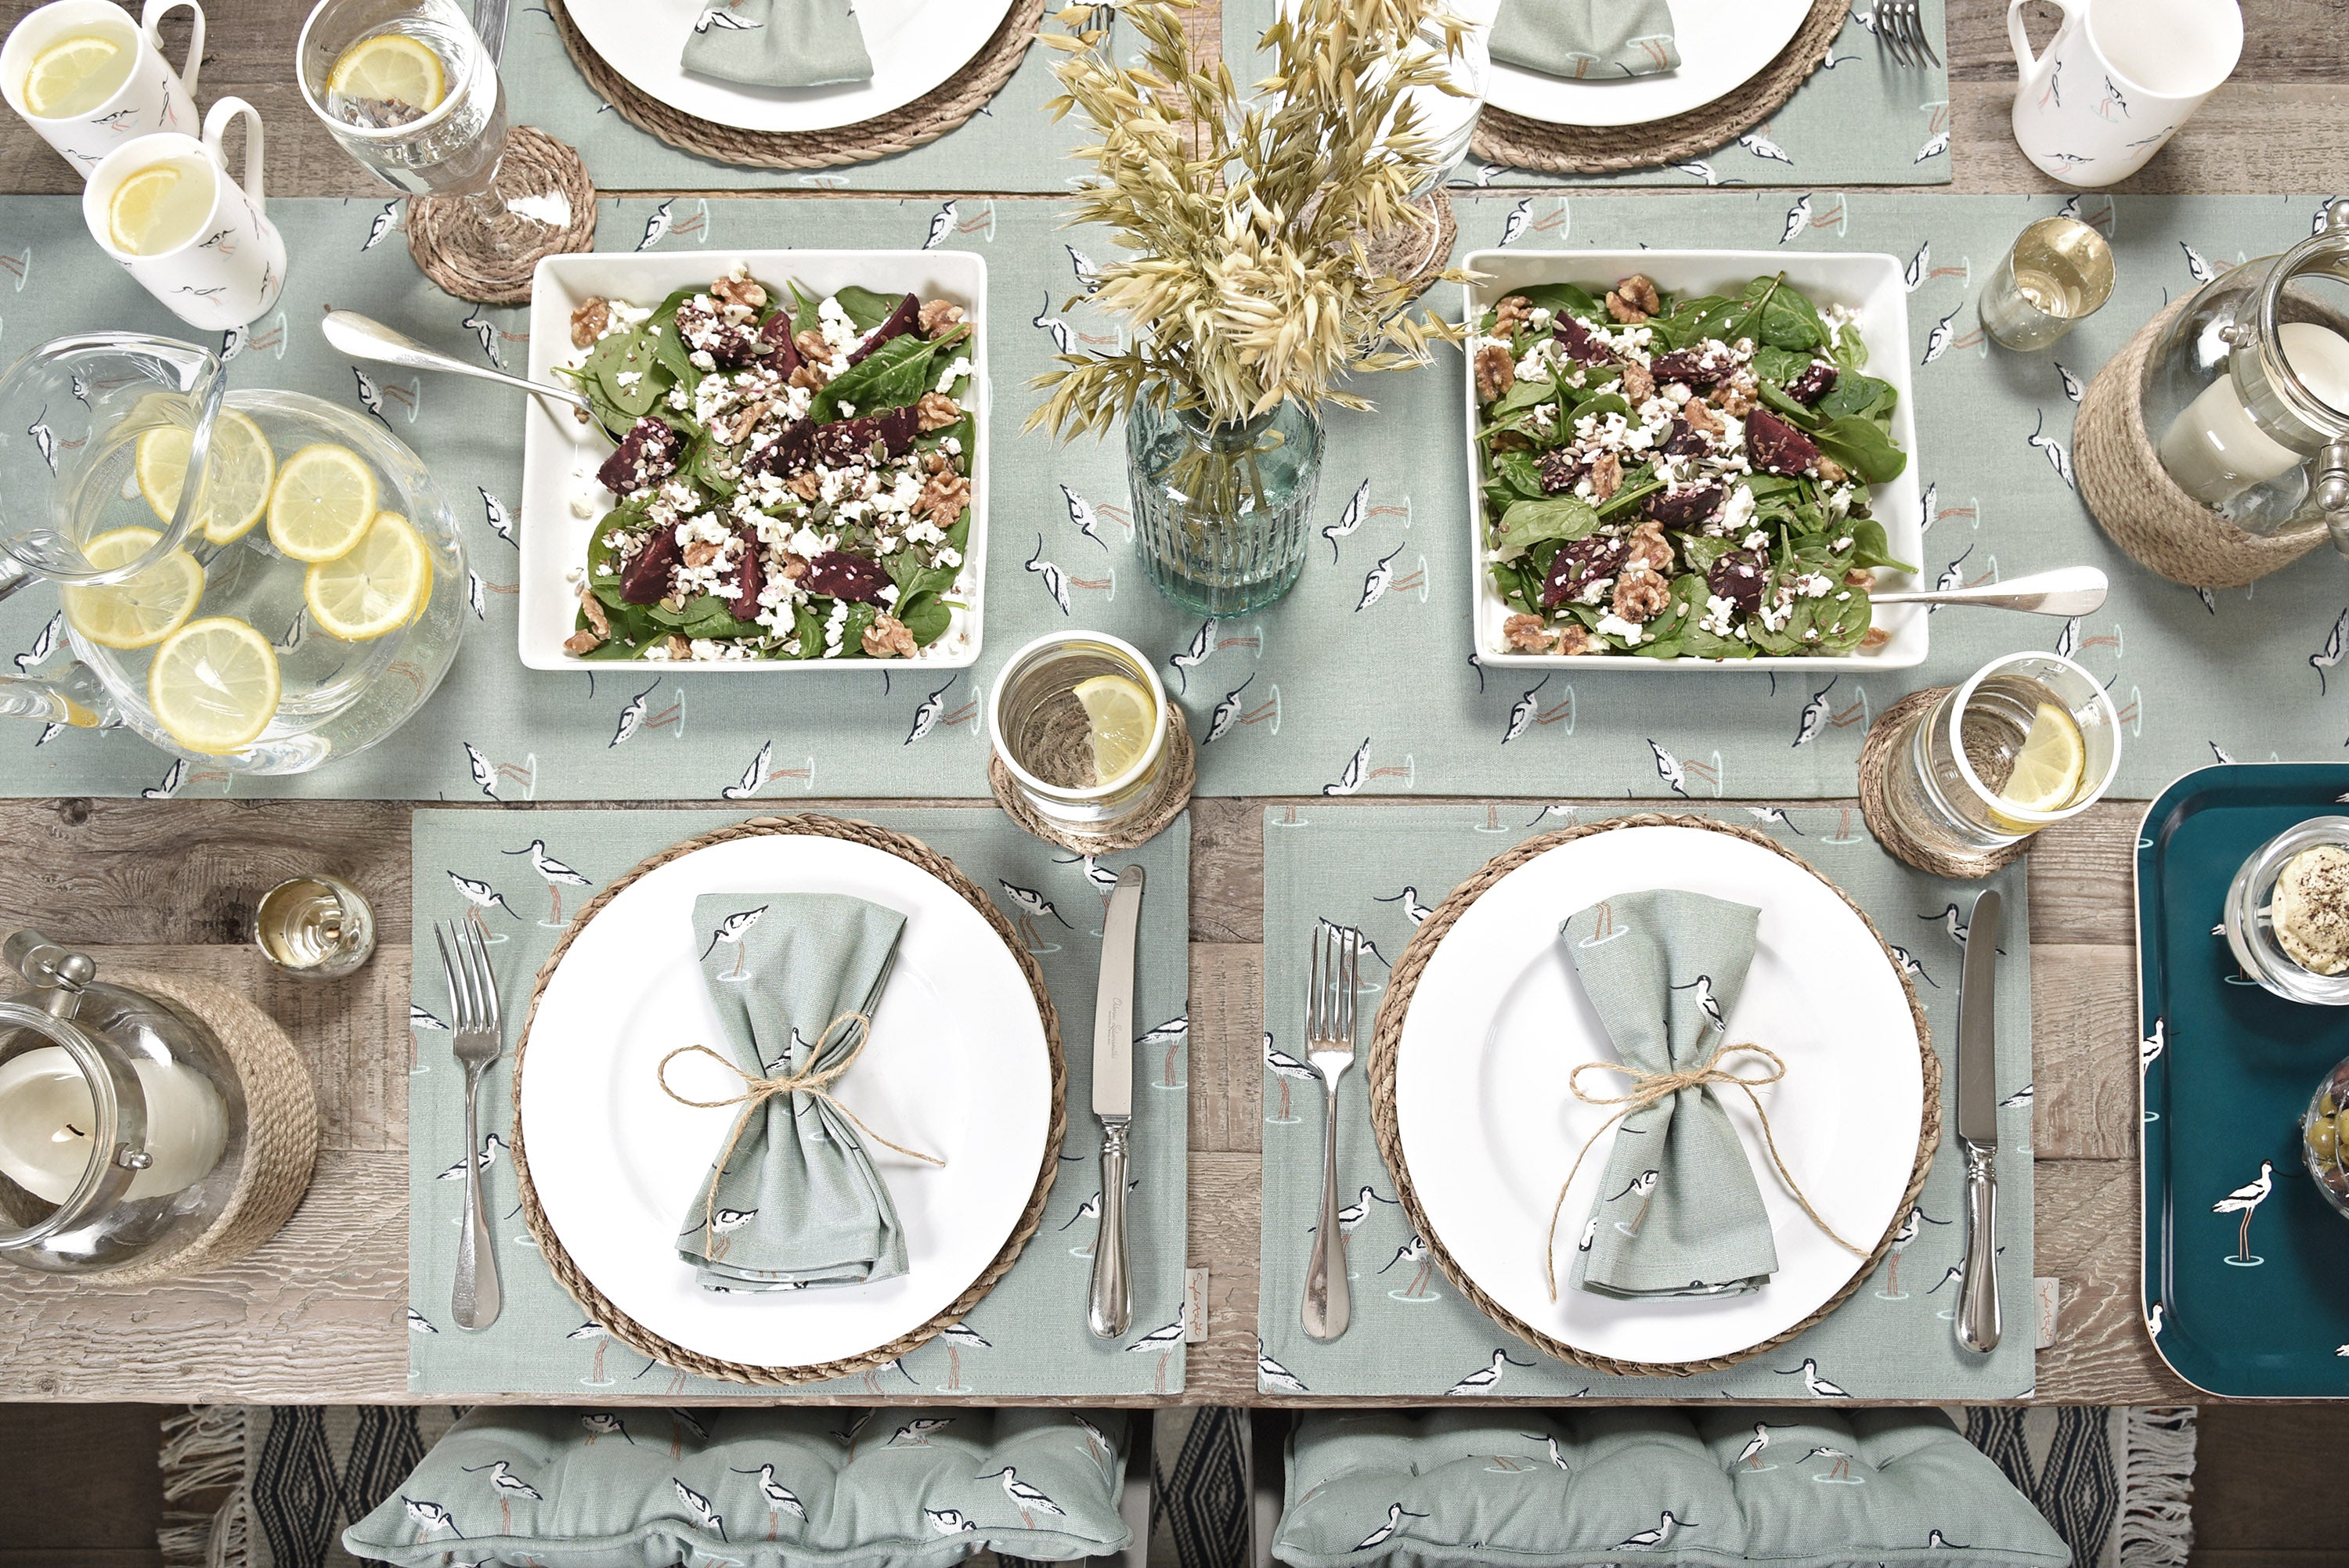 A beautiful table setting, with Sophie Allport's Coastal Birds design, with fabric place mats, napkins and table runner.